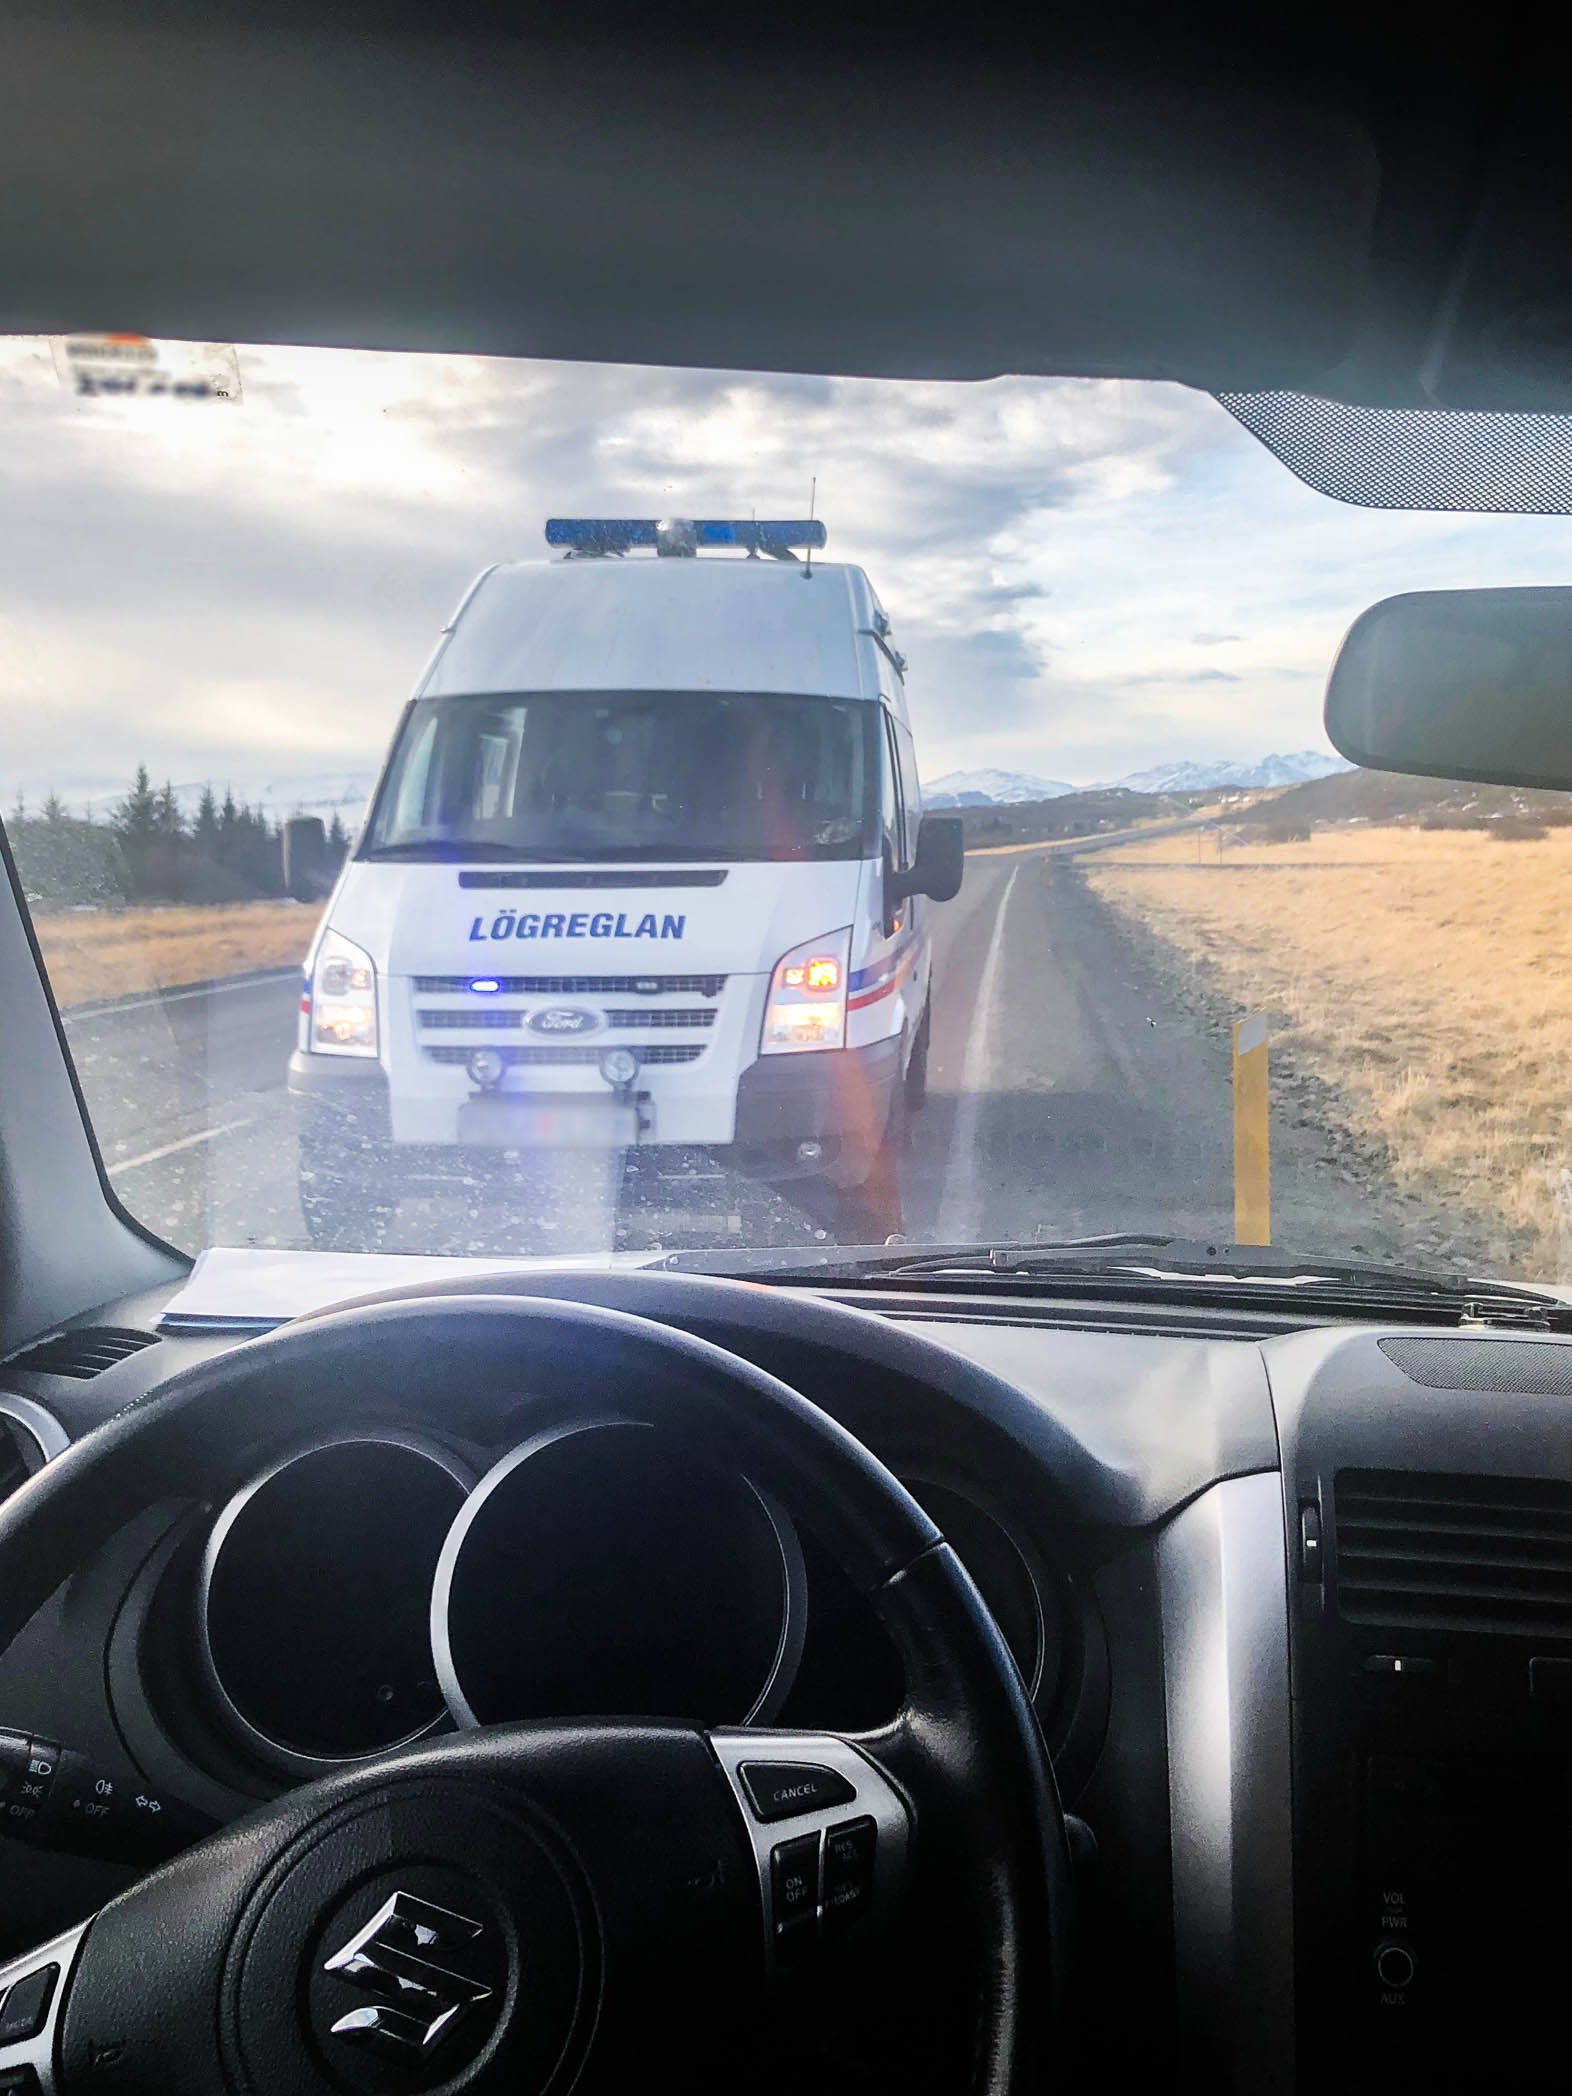 Pulled over in Iceland by police